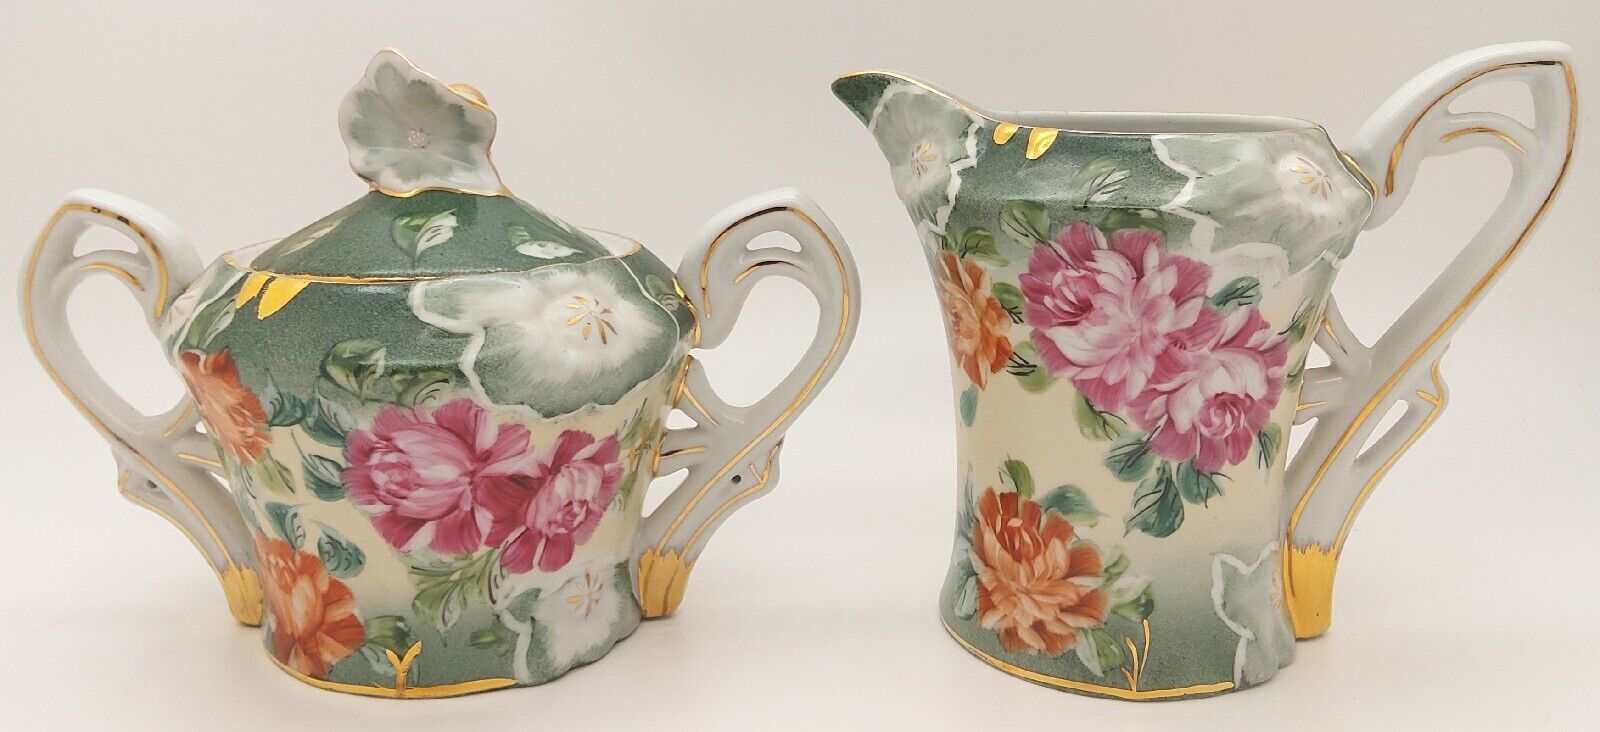 Vintage Faux Limoges China Green Floral with Gold Large Creamer Pitcher & Sugar